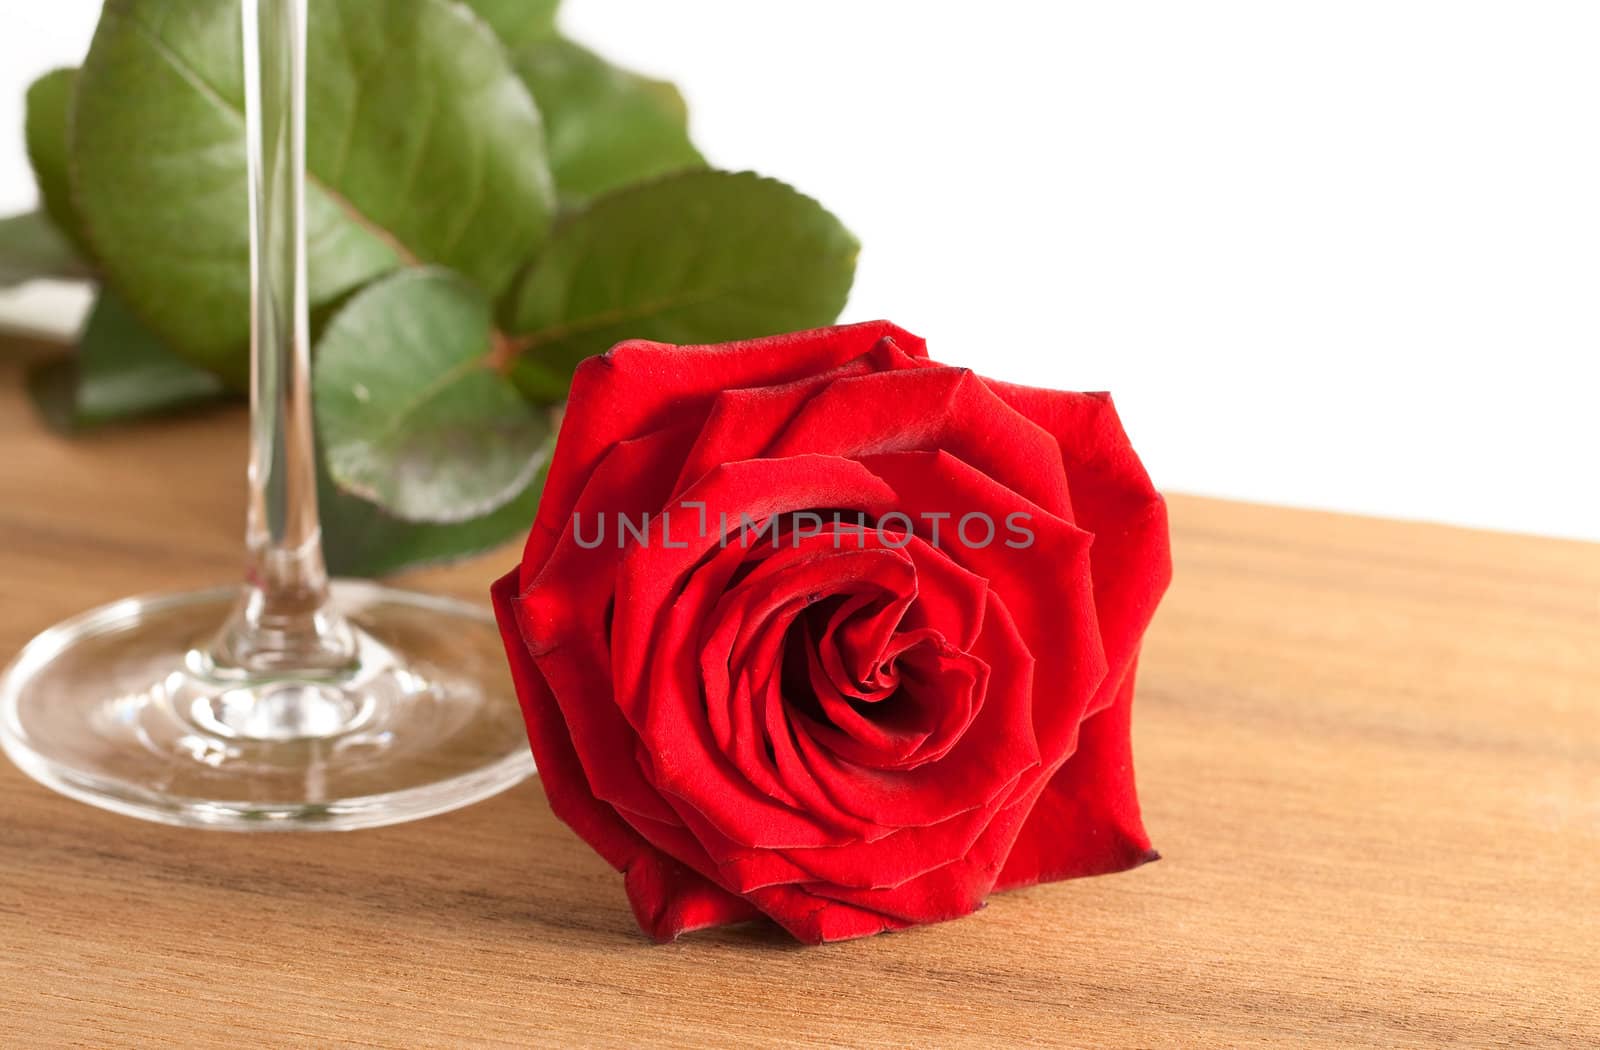 A red rose and a wine glass on a wooden bottom isolated on white background